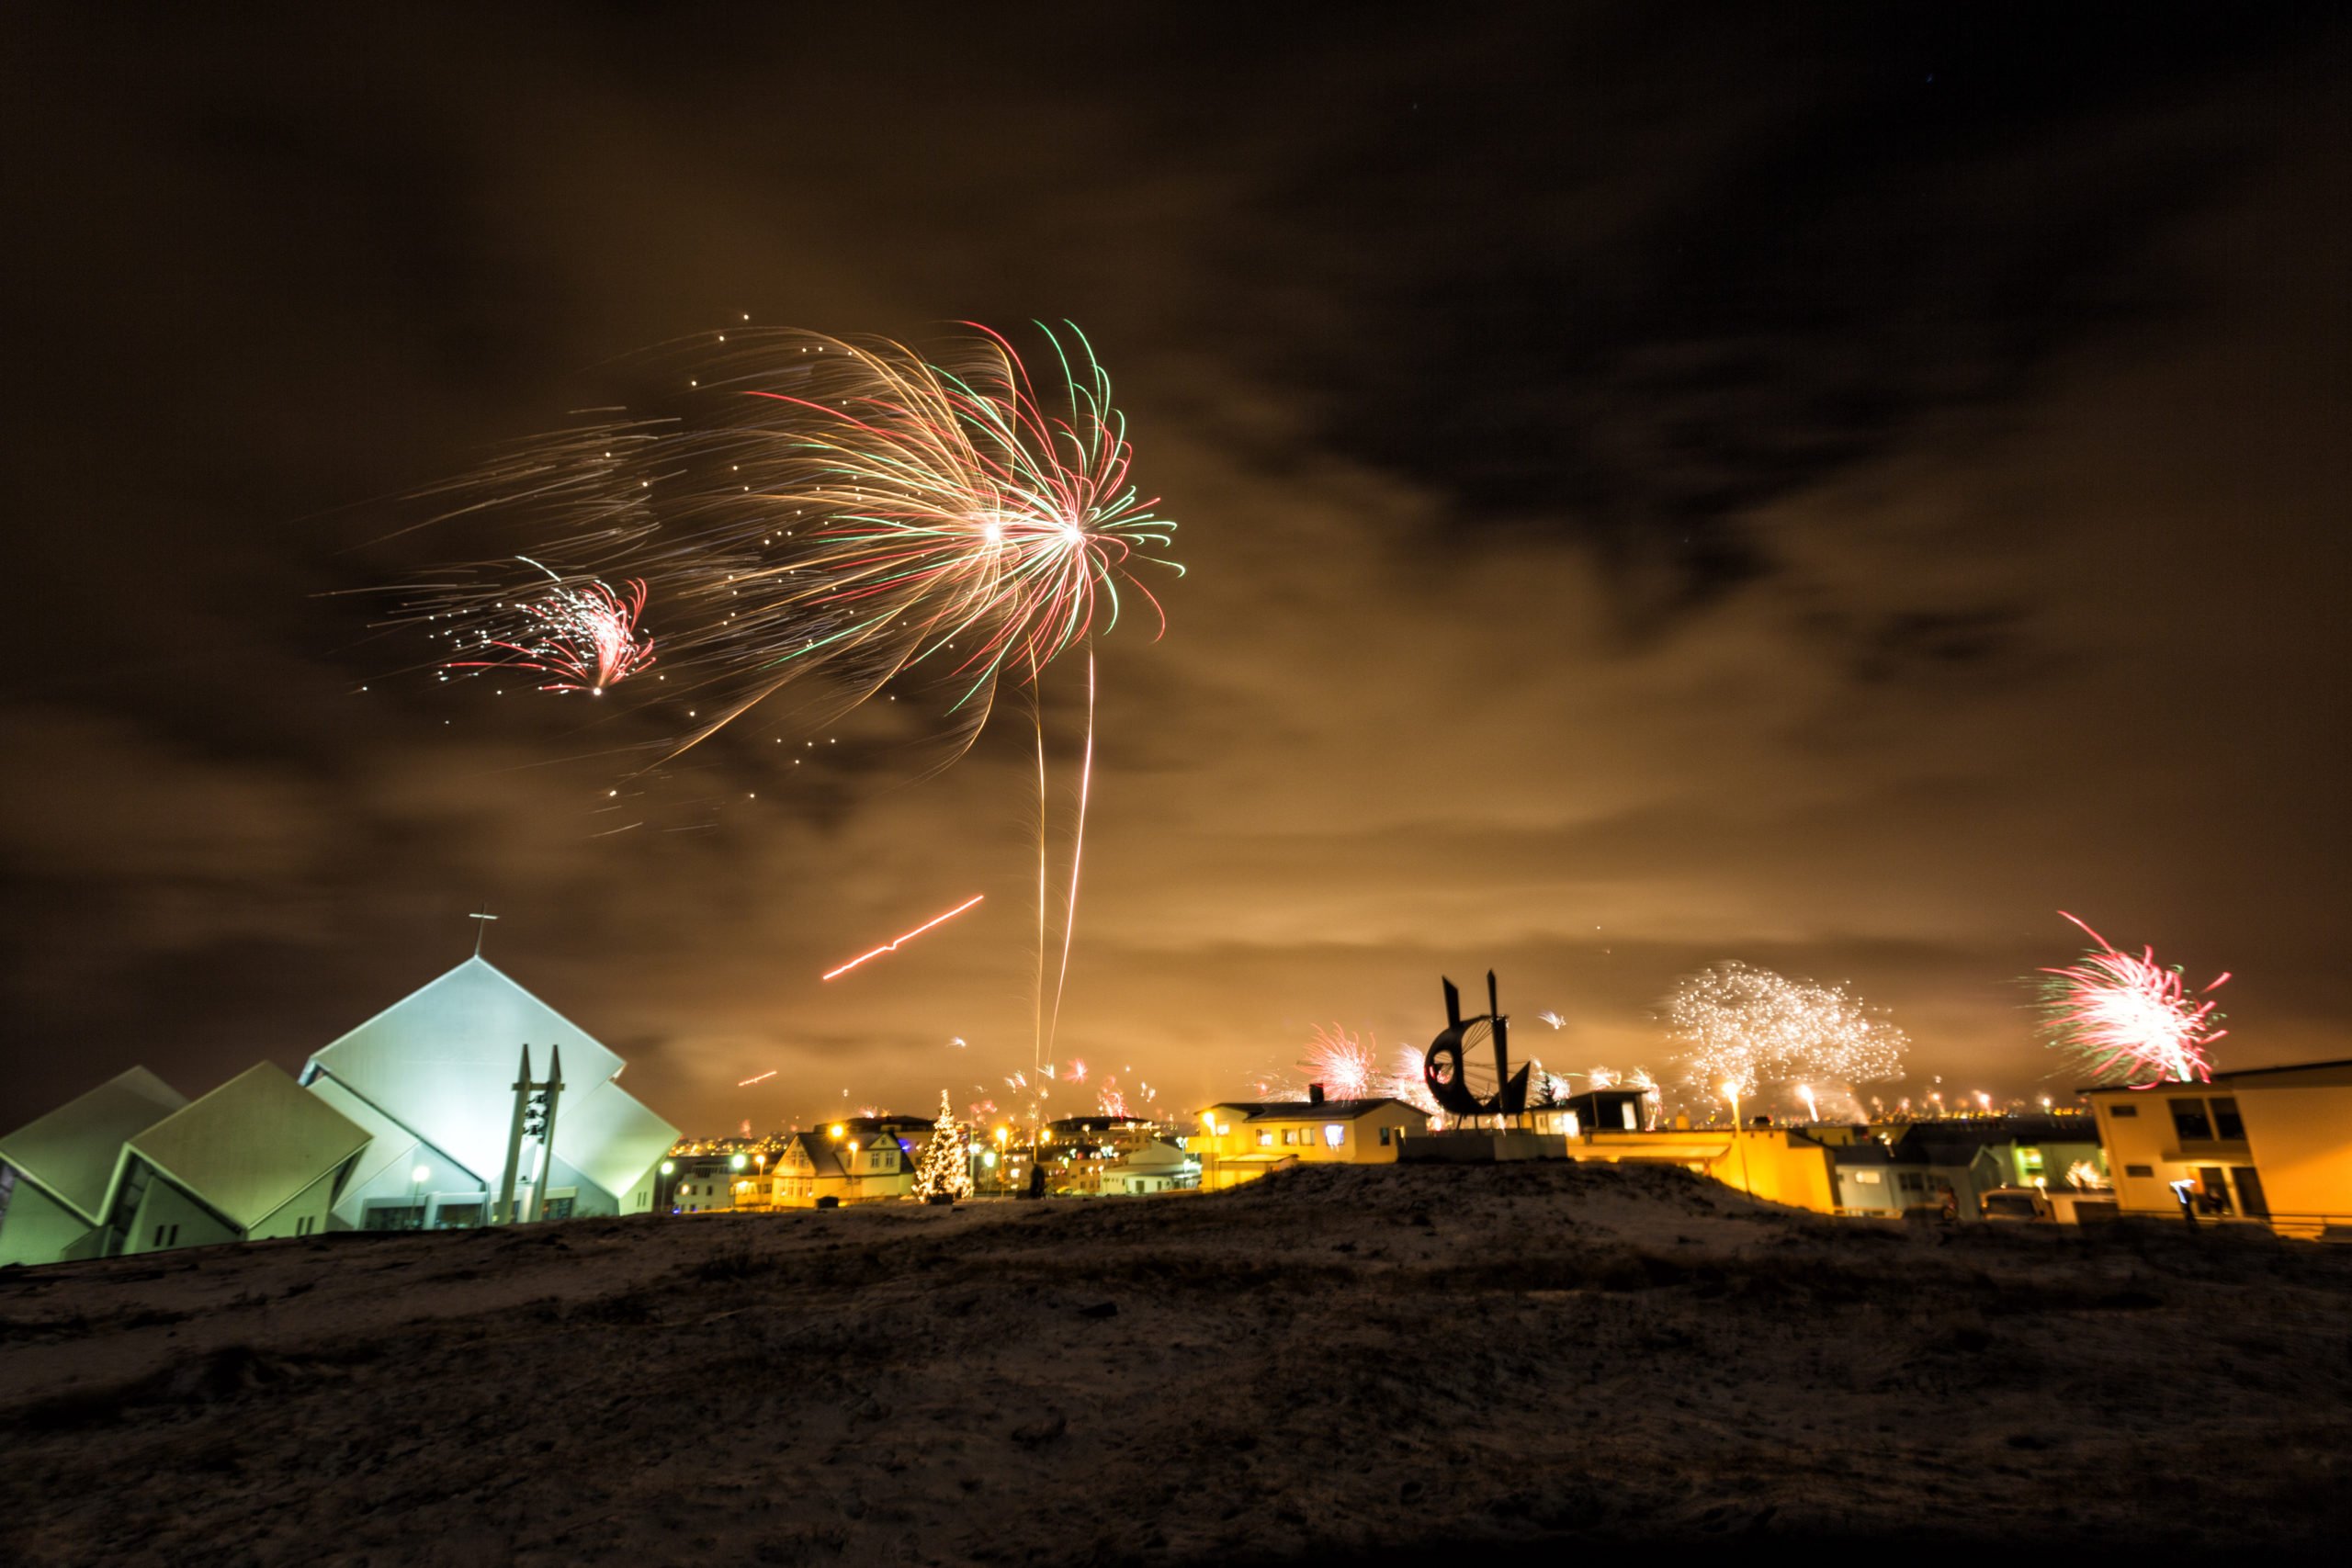 Learn About The Icelandic Traditions On New Years Eve In Our New Year's Eve Bonfire Tour